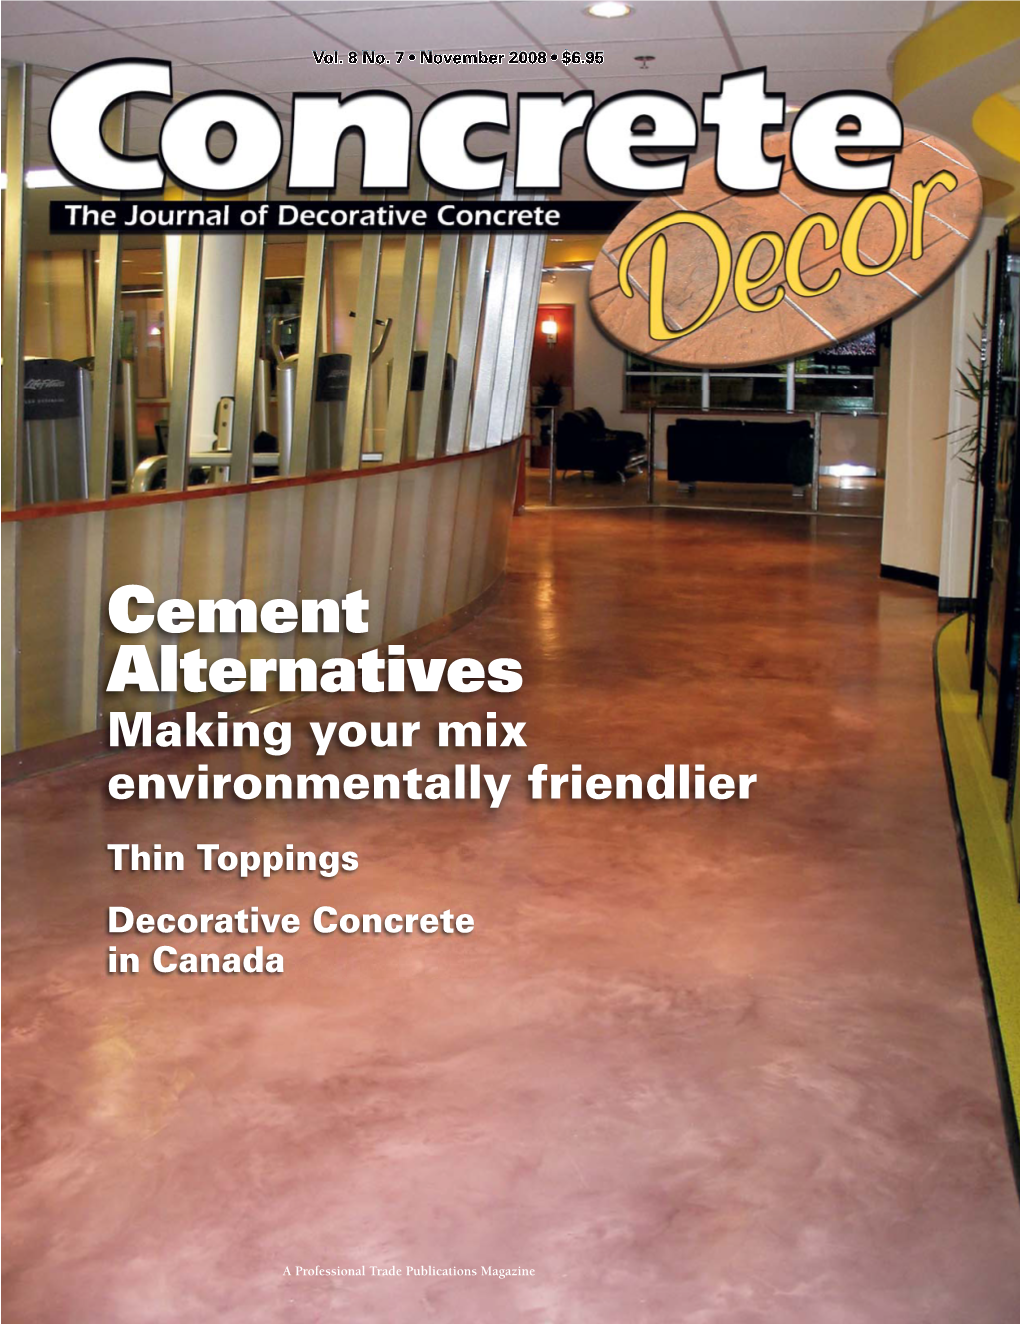 Cement Alternatives Making Your Mix Environmentally Friendlier Thin Toppings Decorative Concrete in Canada